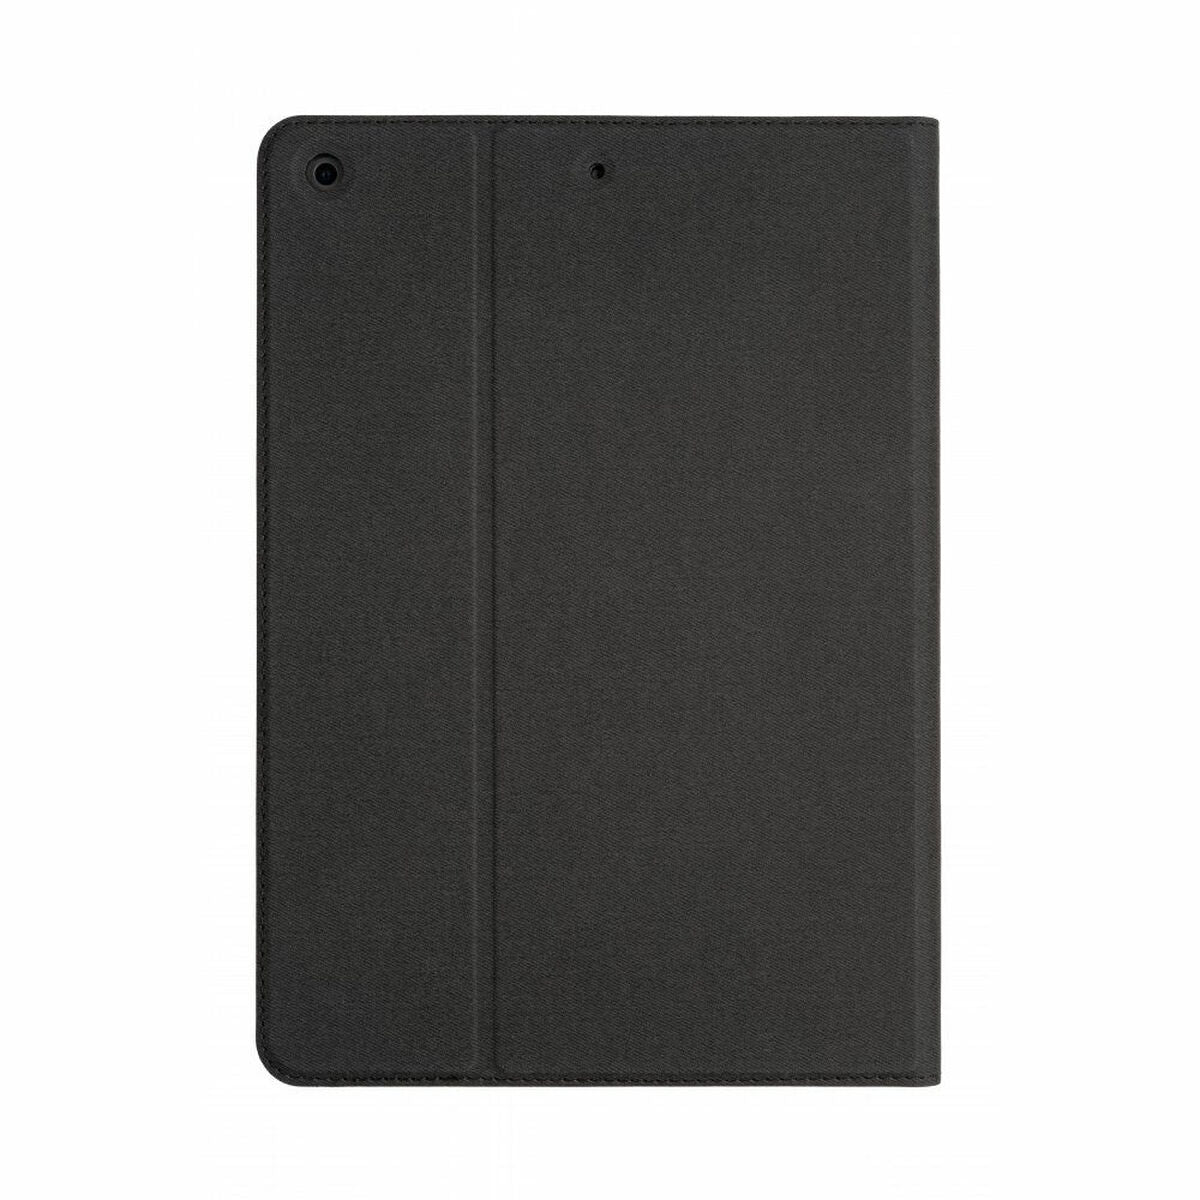 Tablet cover Gecko Covers V10T59C1 Black, Gecko Covers, Toys and games, Electronic toys, tablet-cover-gecko-covers-v10t59c1-black, Brand_Gecko Covers, category-reference-2609, category-reference-2617, category-reference-2626, category-reference-t-11190, category-reference-t-11203, category-reference-t-11206, category-reference-t-19663, Condition_NEW, entertainment, para los más peques, Price_20 - 50, telephones & tablets, vuelta al cole, RiotNook